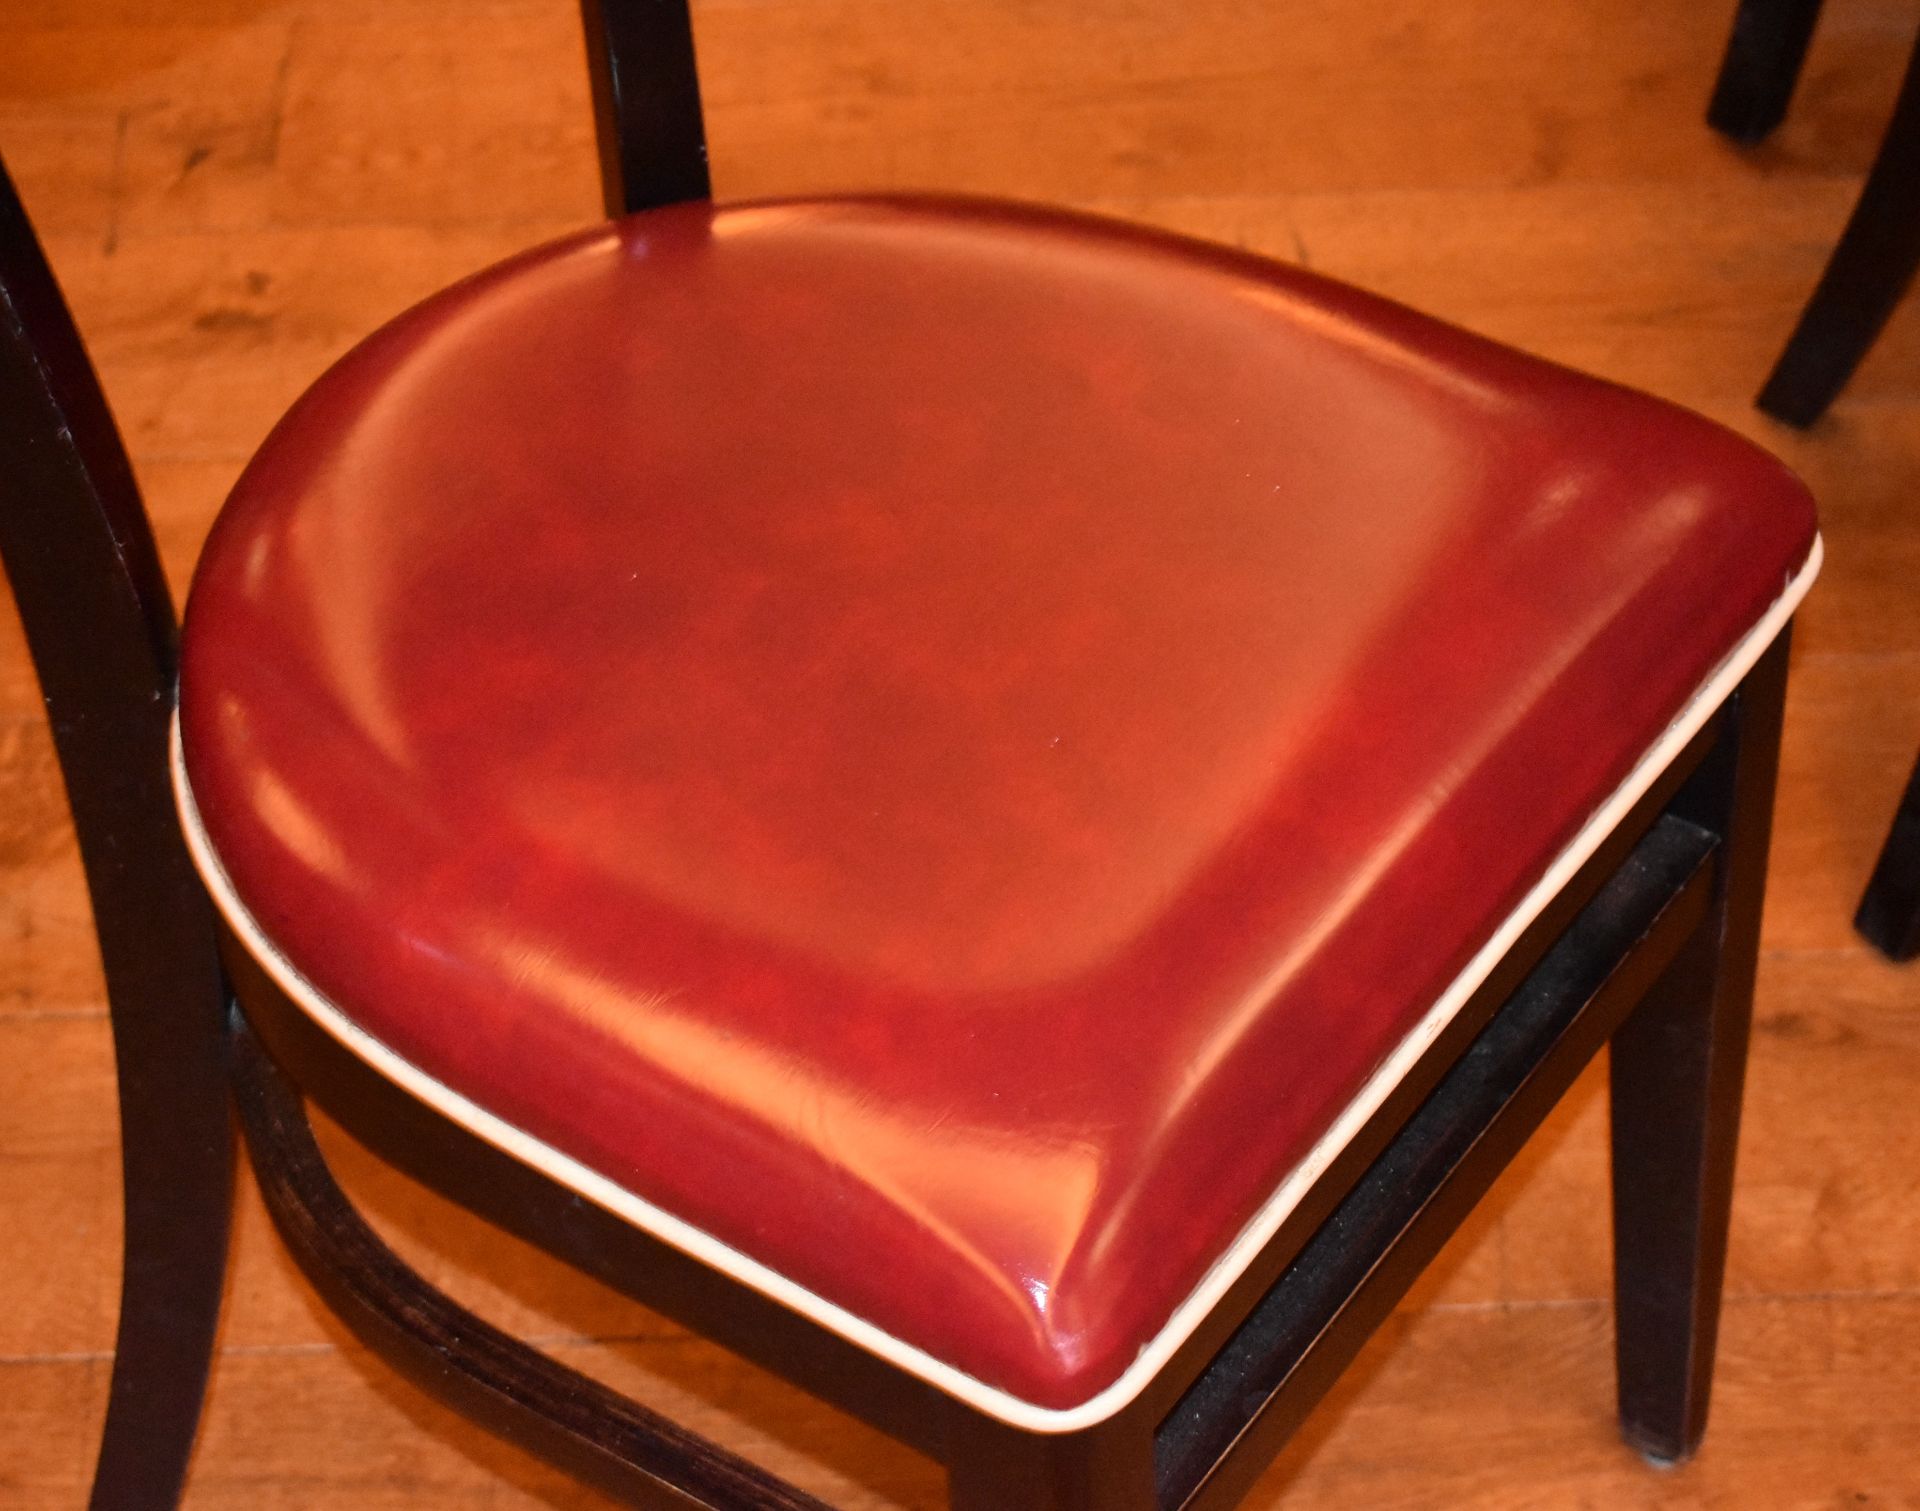 4 x American Diner Restaurant Chairs - Features Red Faux Leather Upholstery and White Piping - - Image 4 of 4